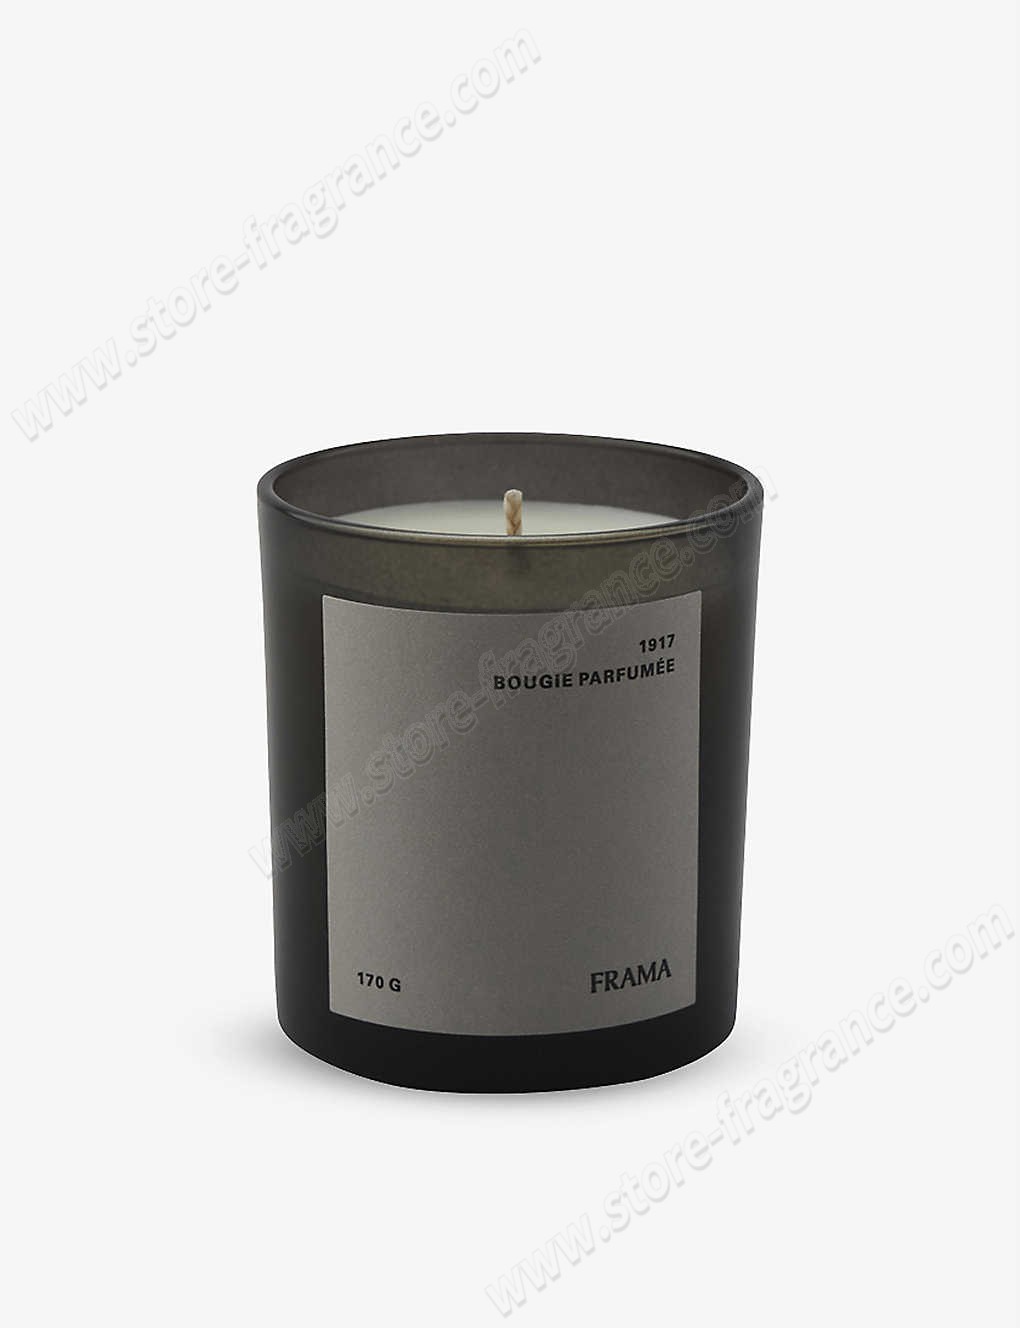 FRAMA/1917 scented candle 170g ✿ Discount Store - FRAMA/1917 scented candle 170g ✿ Discount Store